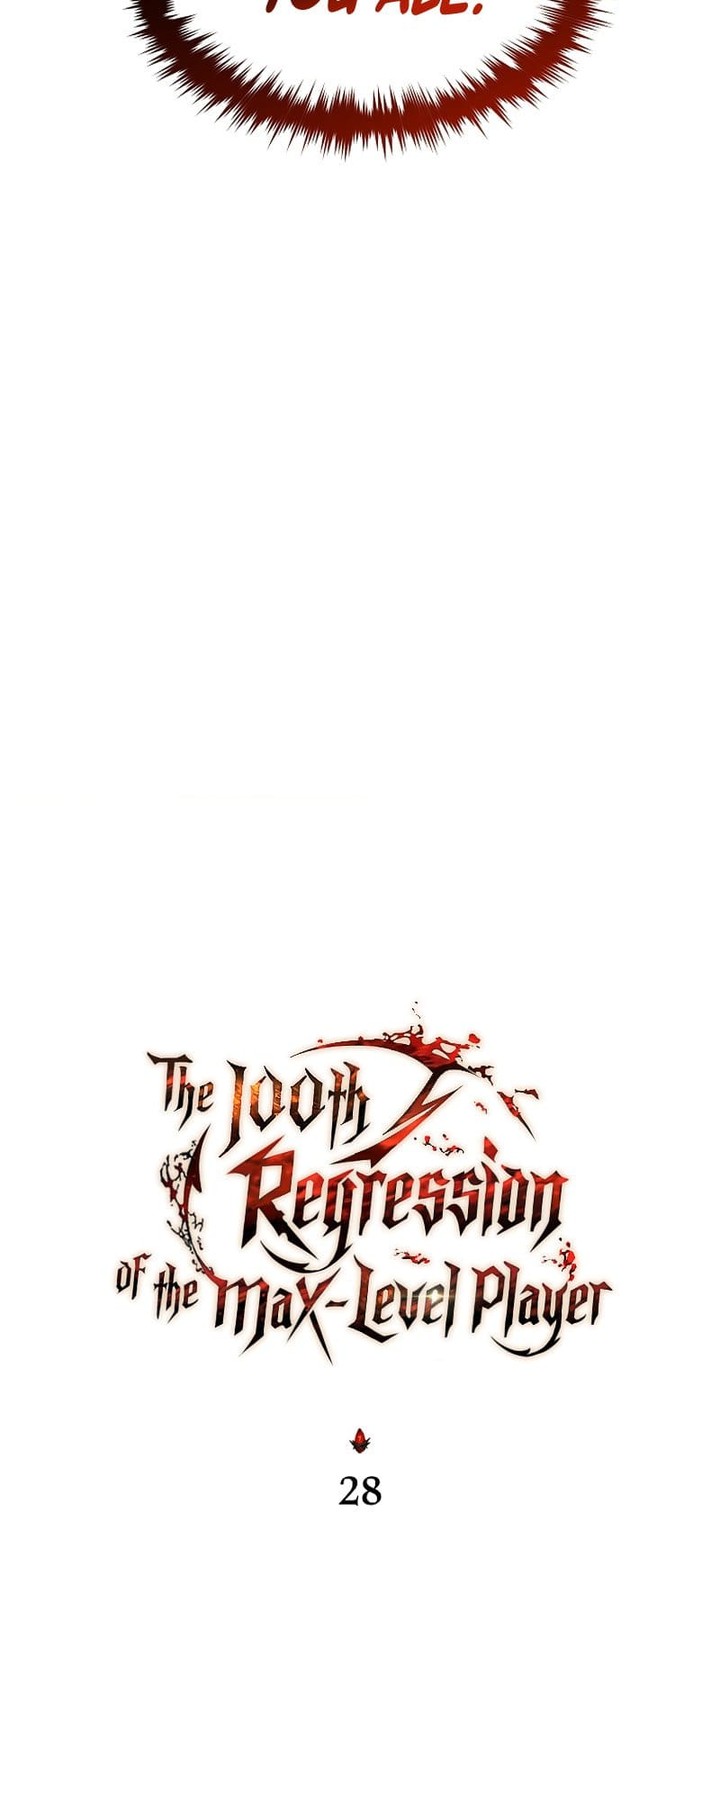 the_max_level_players_100th_regression_28_18